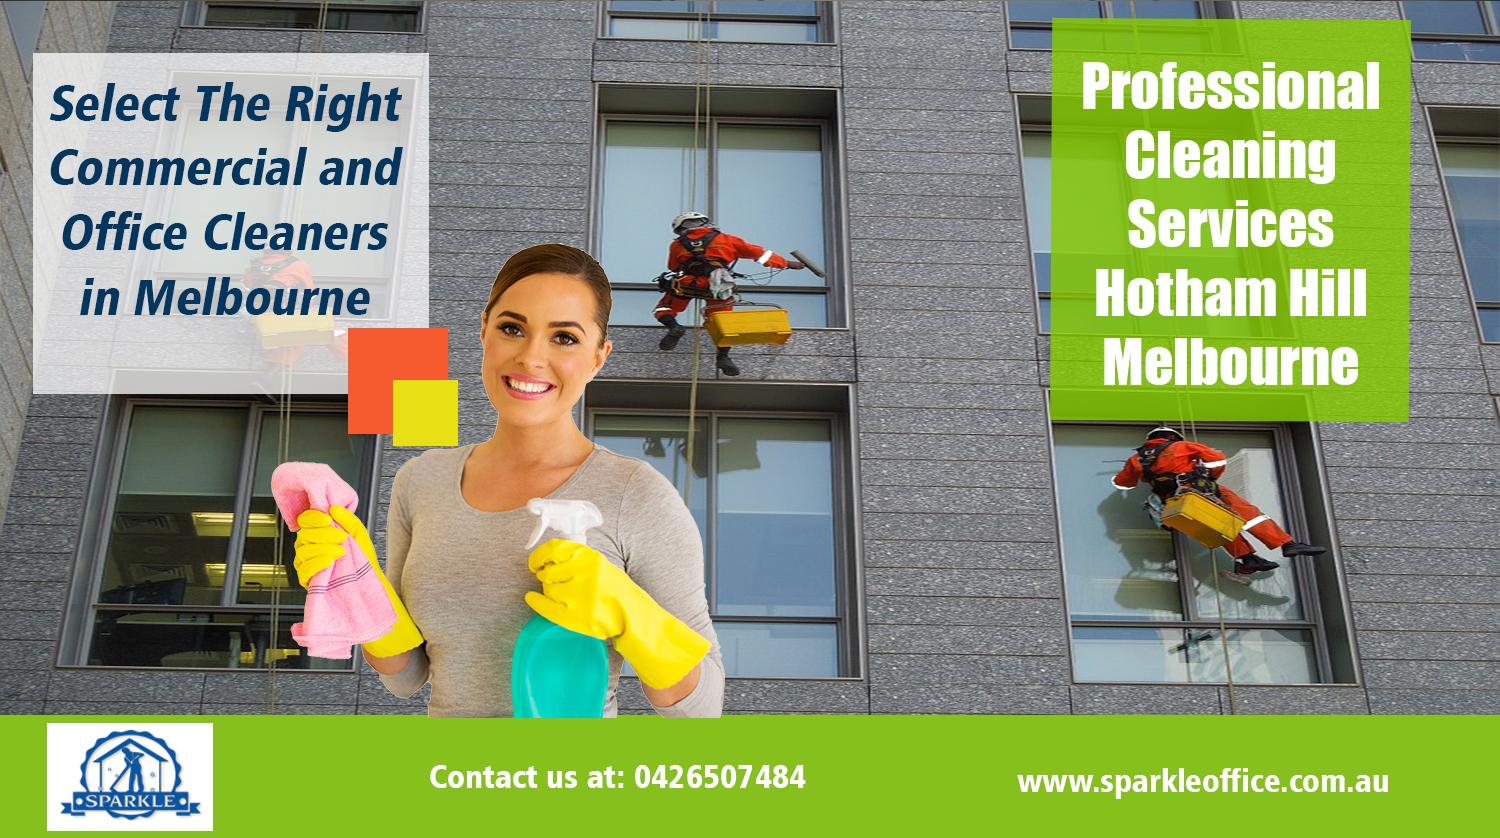 Professional Cleaning Services Hotham Hill Melbourne